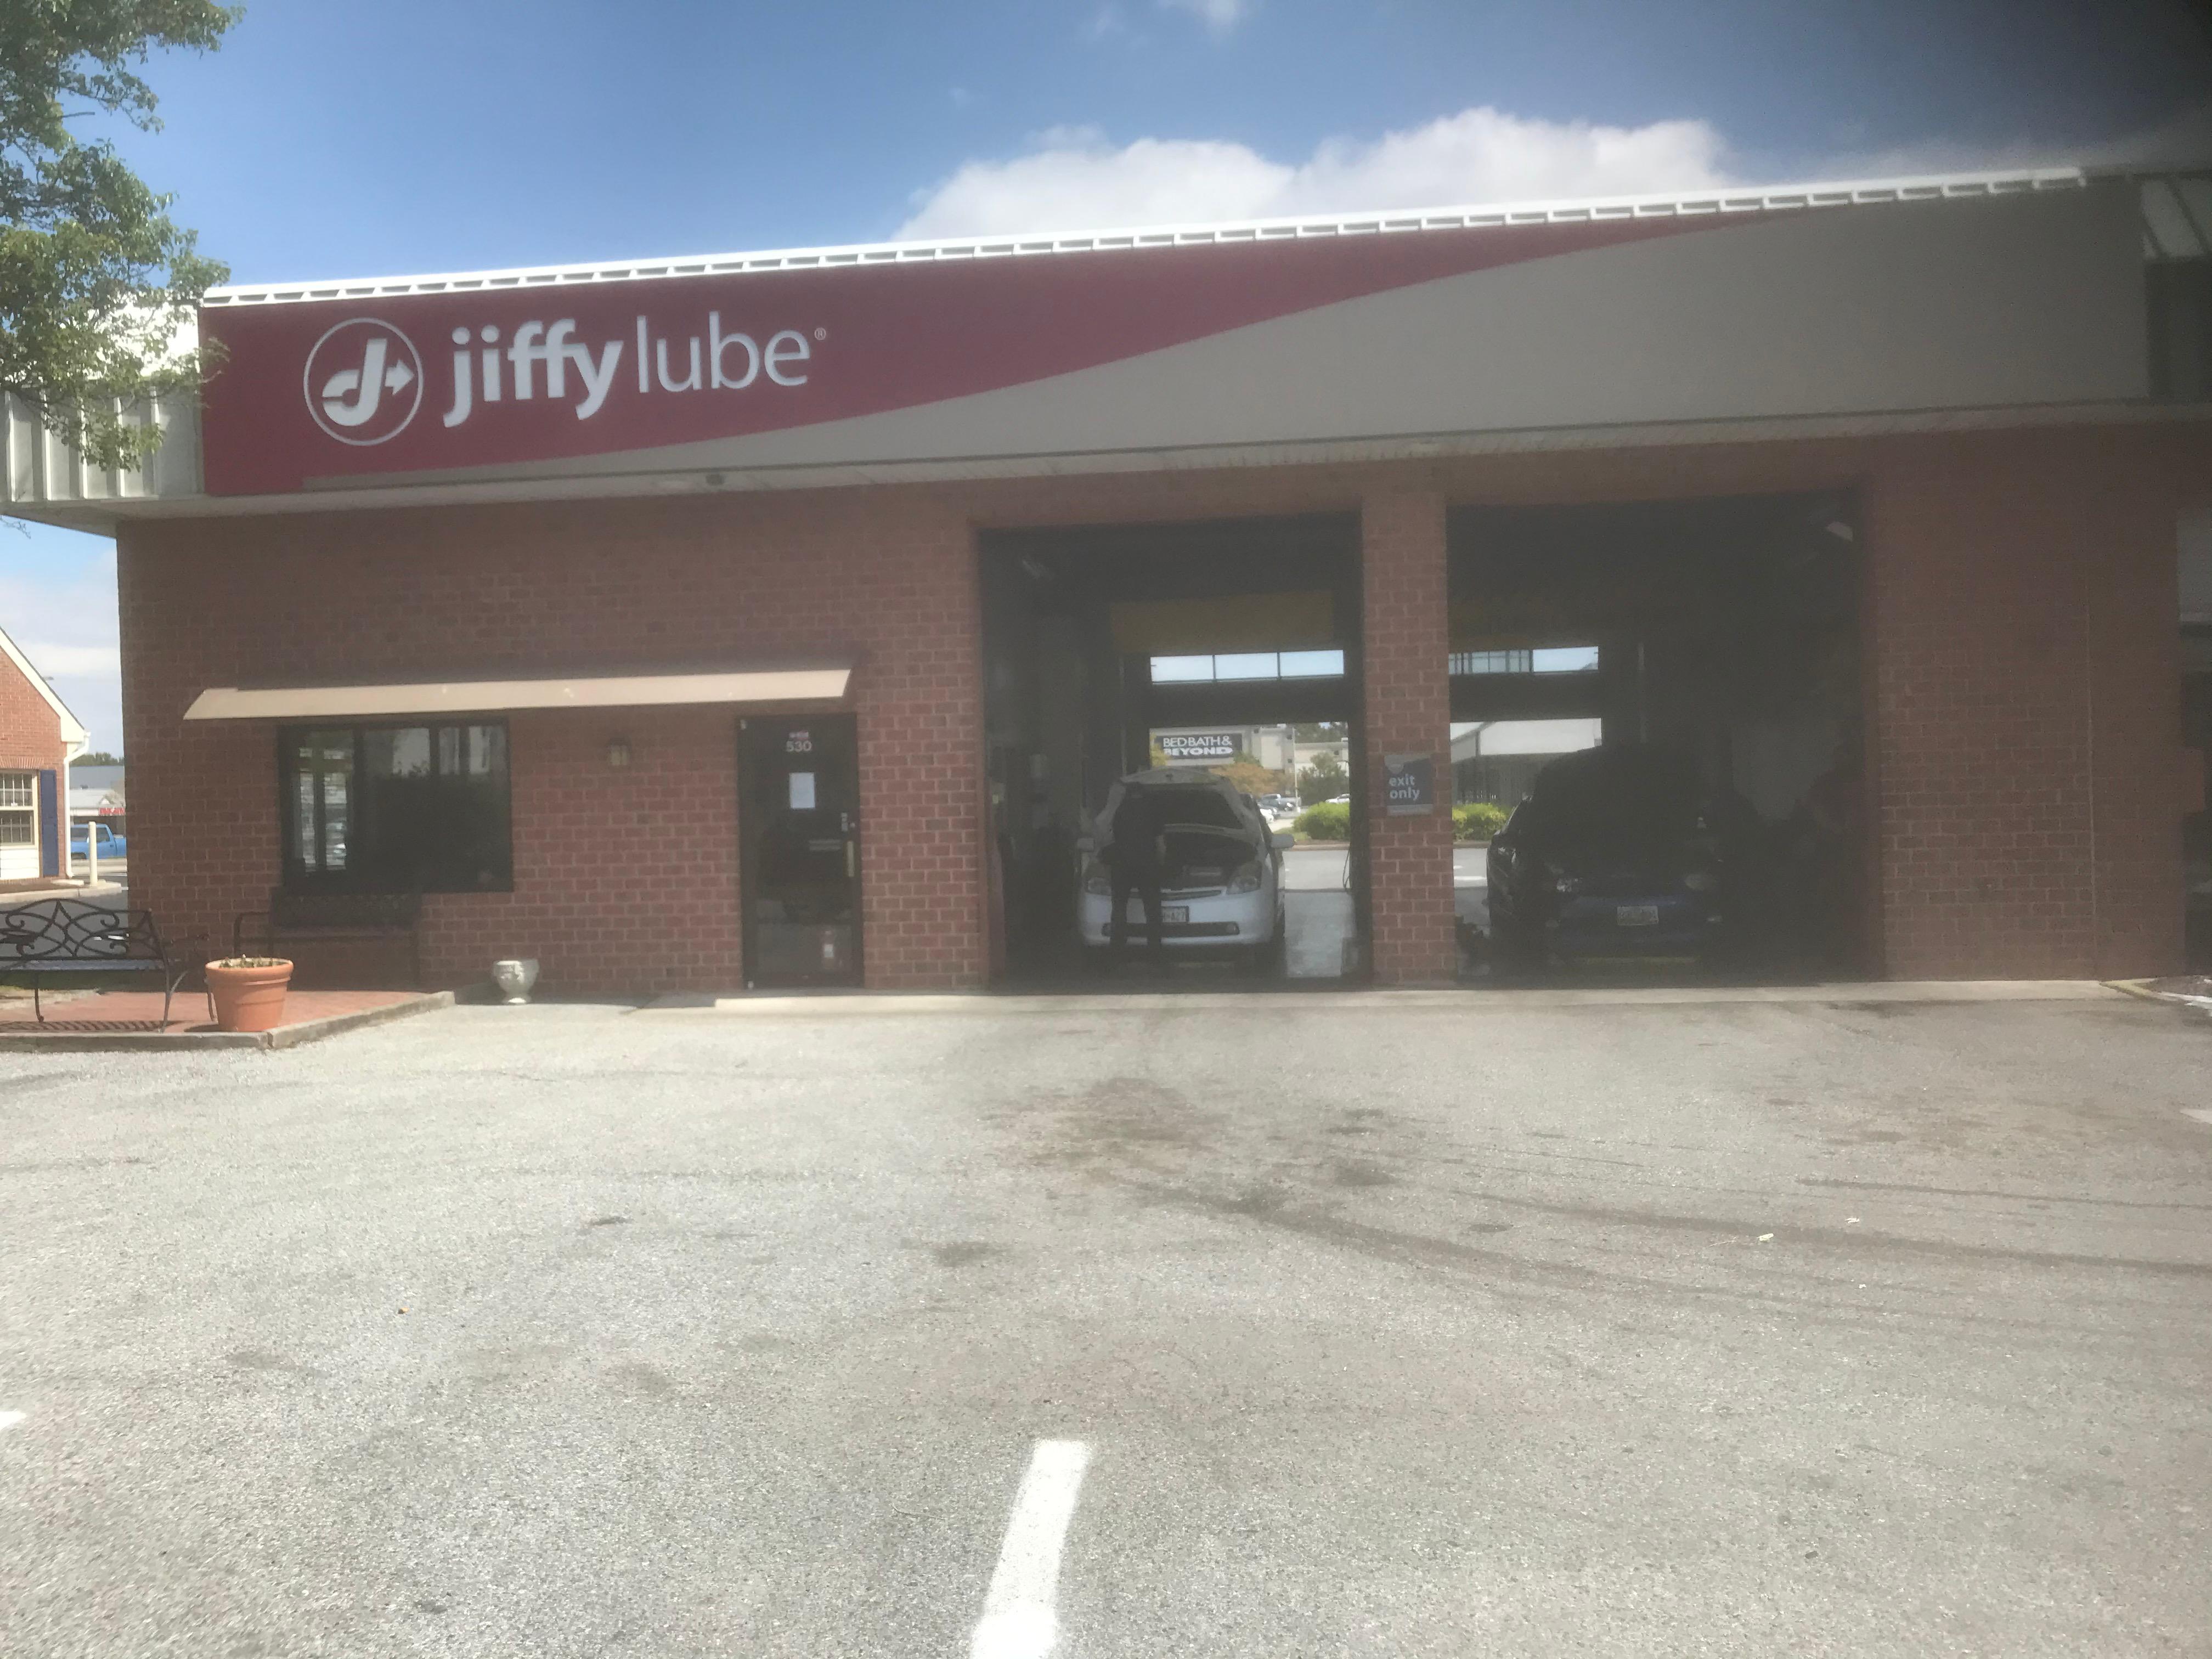 Jiffy Lube Coupons near me in Ocean City, MD 21842 8coupons